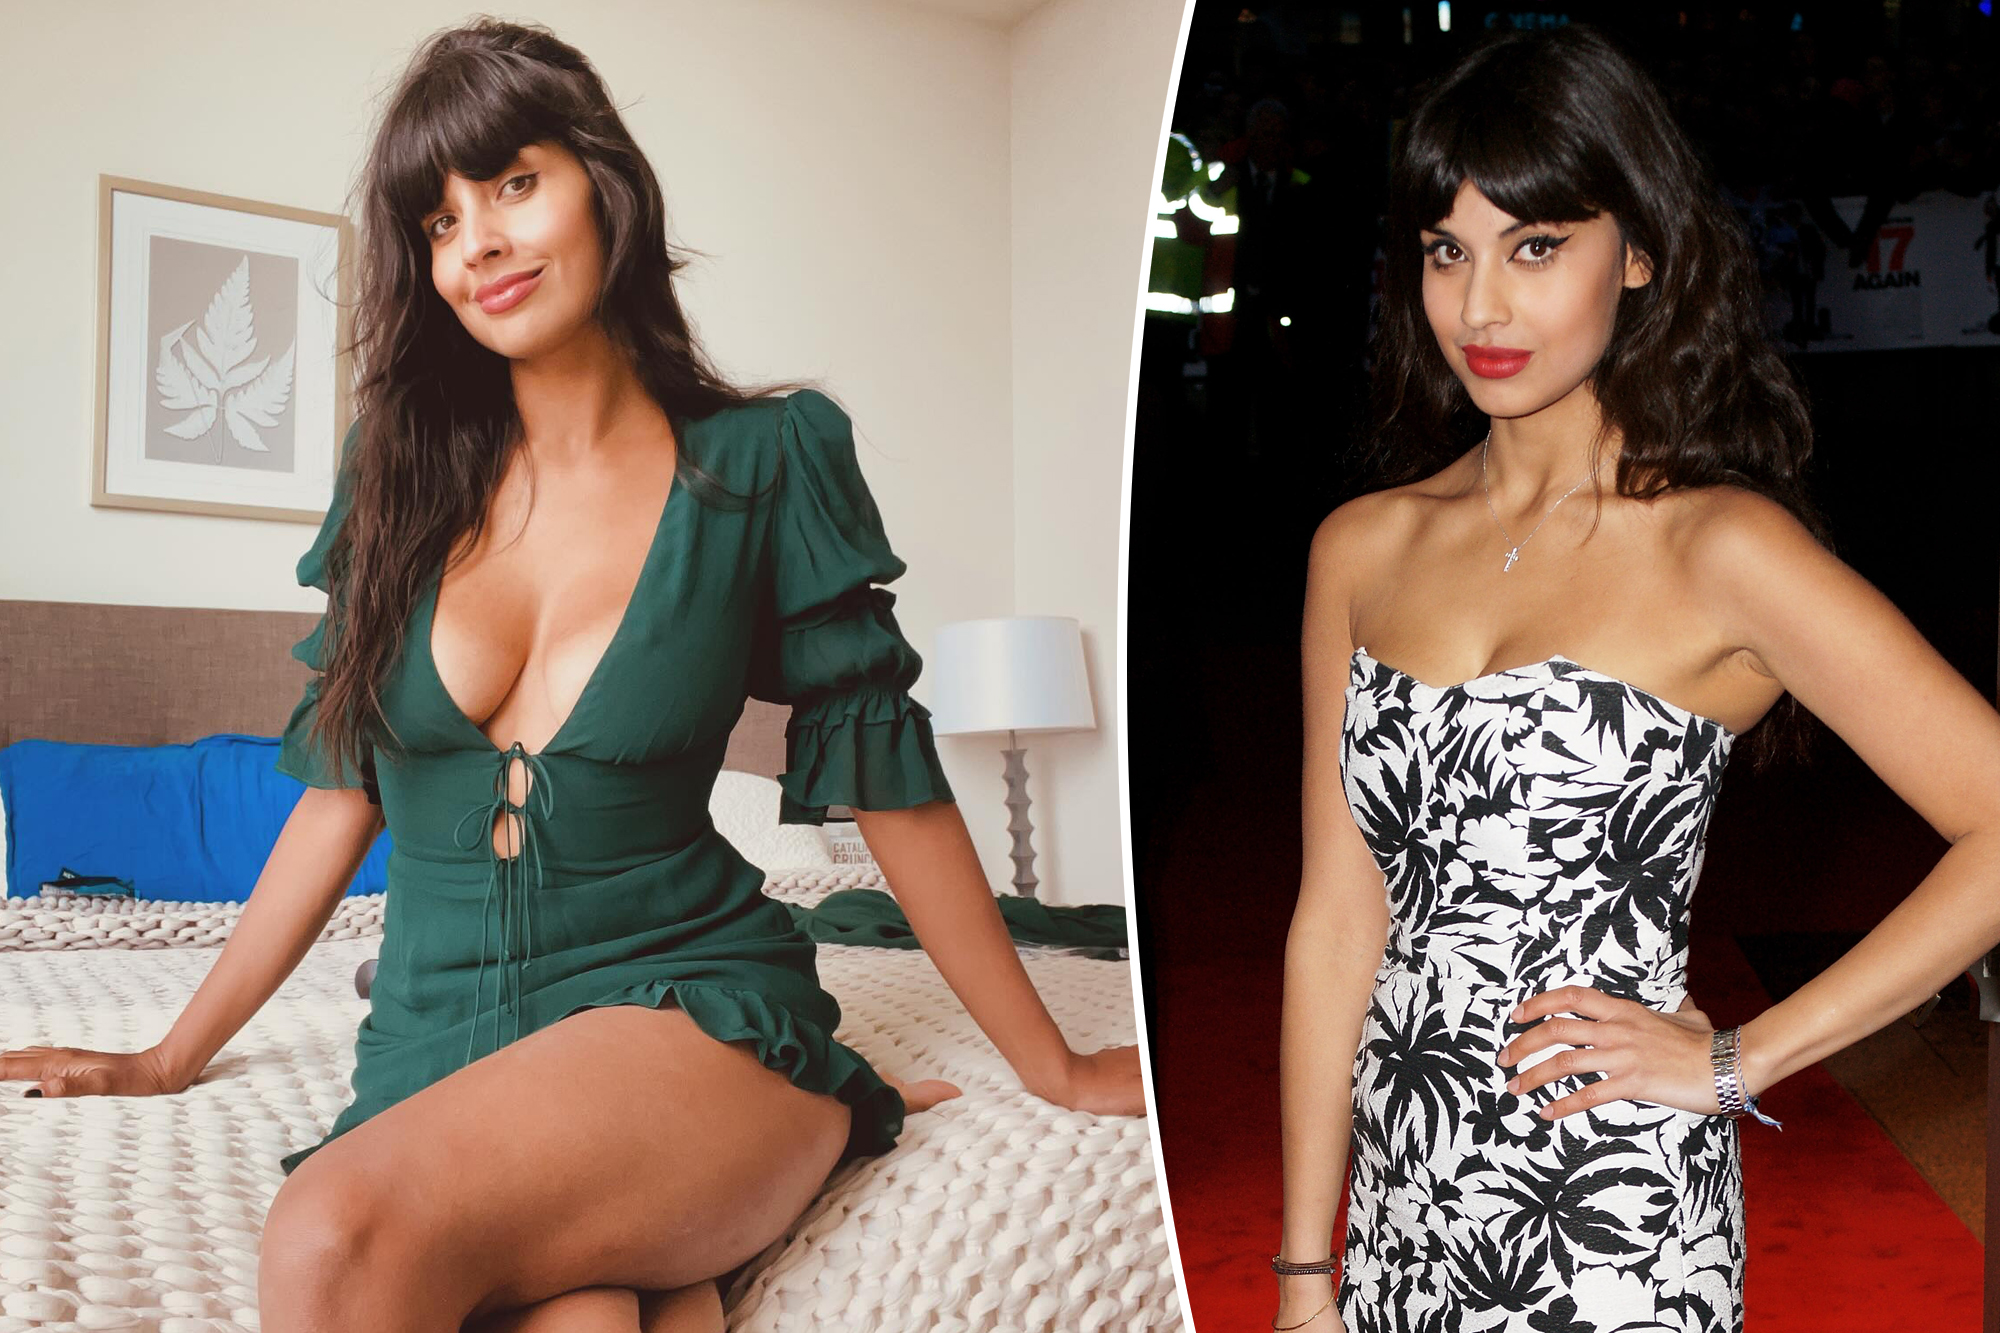 Jameela Jamil Opens Up About Her Battle with Eating Disorders and Body Image